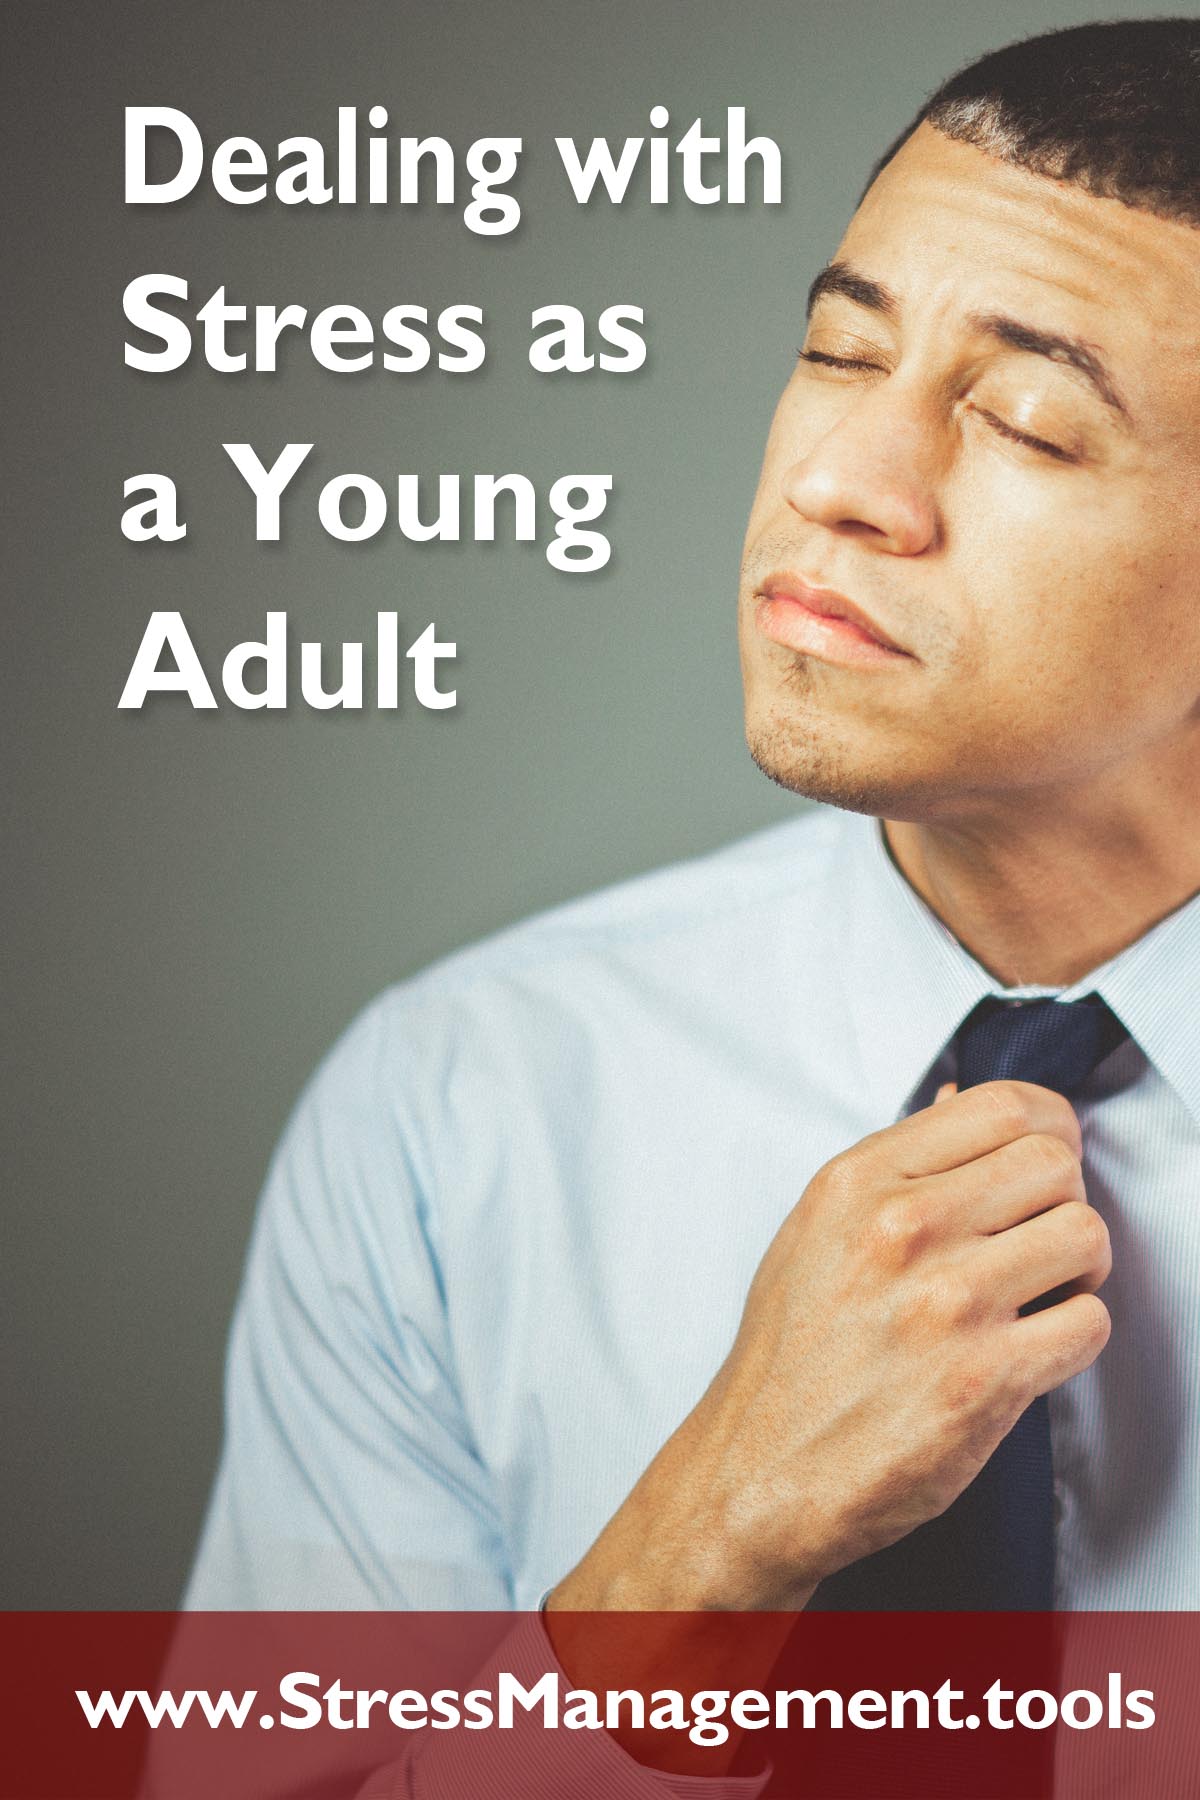 Dealing with Stress as a Young Adult